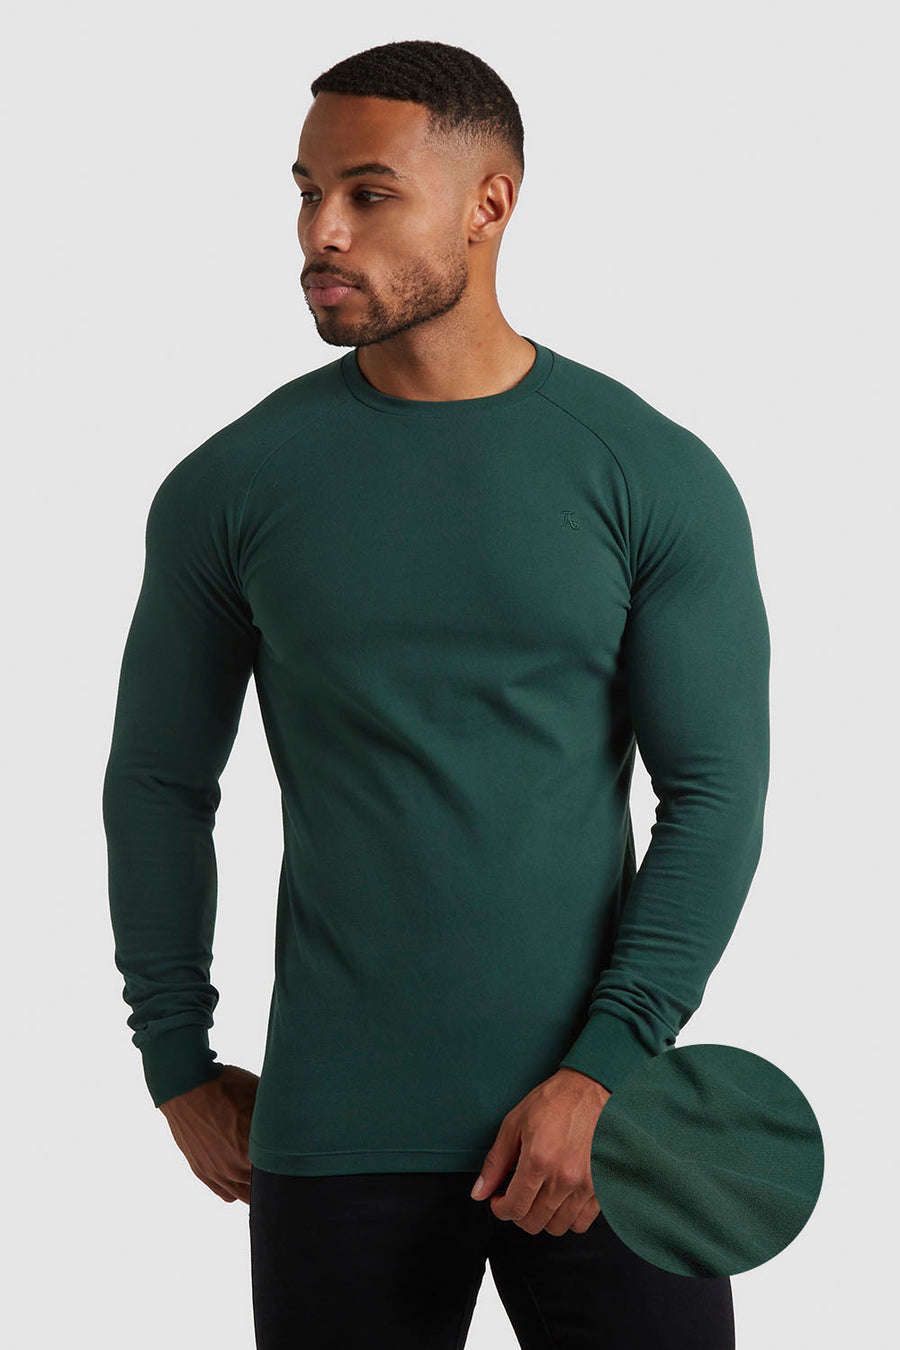 Pique Long Sleeve T-Shirt in Racing Green - TAILORED ATHLETE - USA